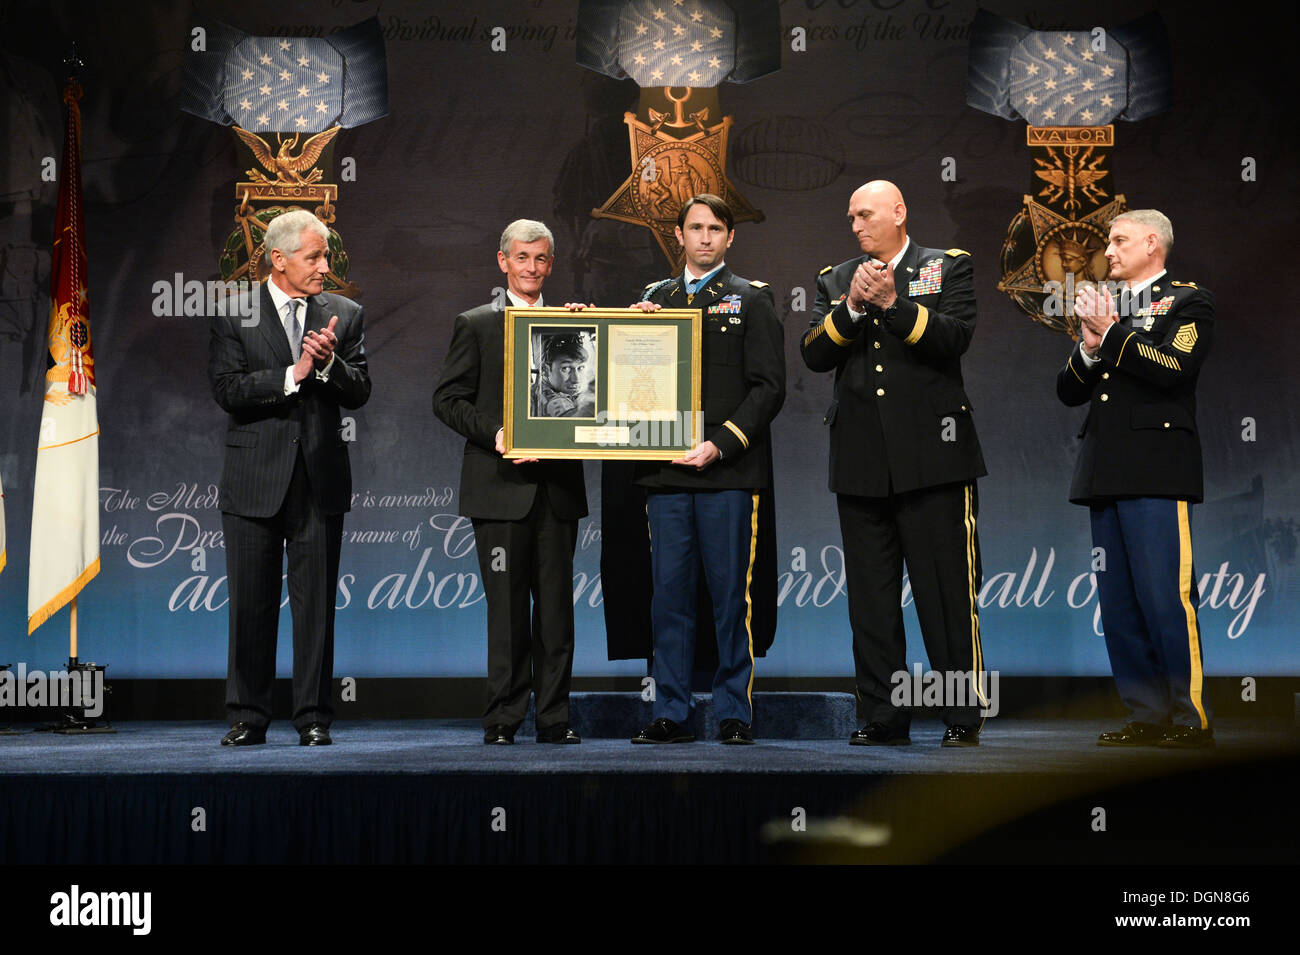 From left to right, Secretary of Defense Chuck Hagel, Secretary of the Army John McHugh, Former U.S. Army Capt. William D. Swenson, Chief of Staff of the Army Gen. Raymond T. Odierno, Sgt. Maj. of the Army Raymond F. Chandler III display a photo and citat Stock Photo